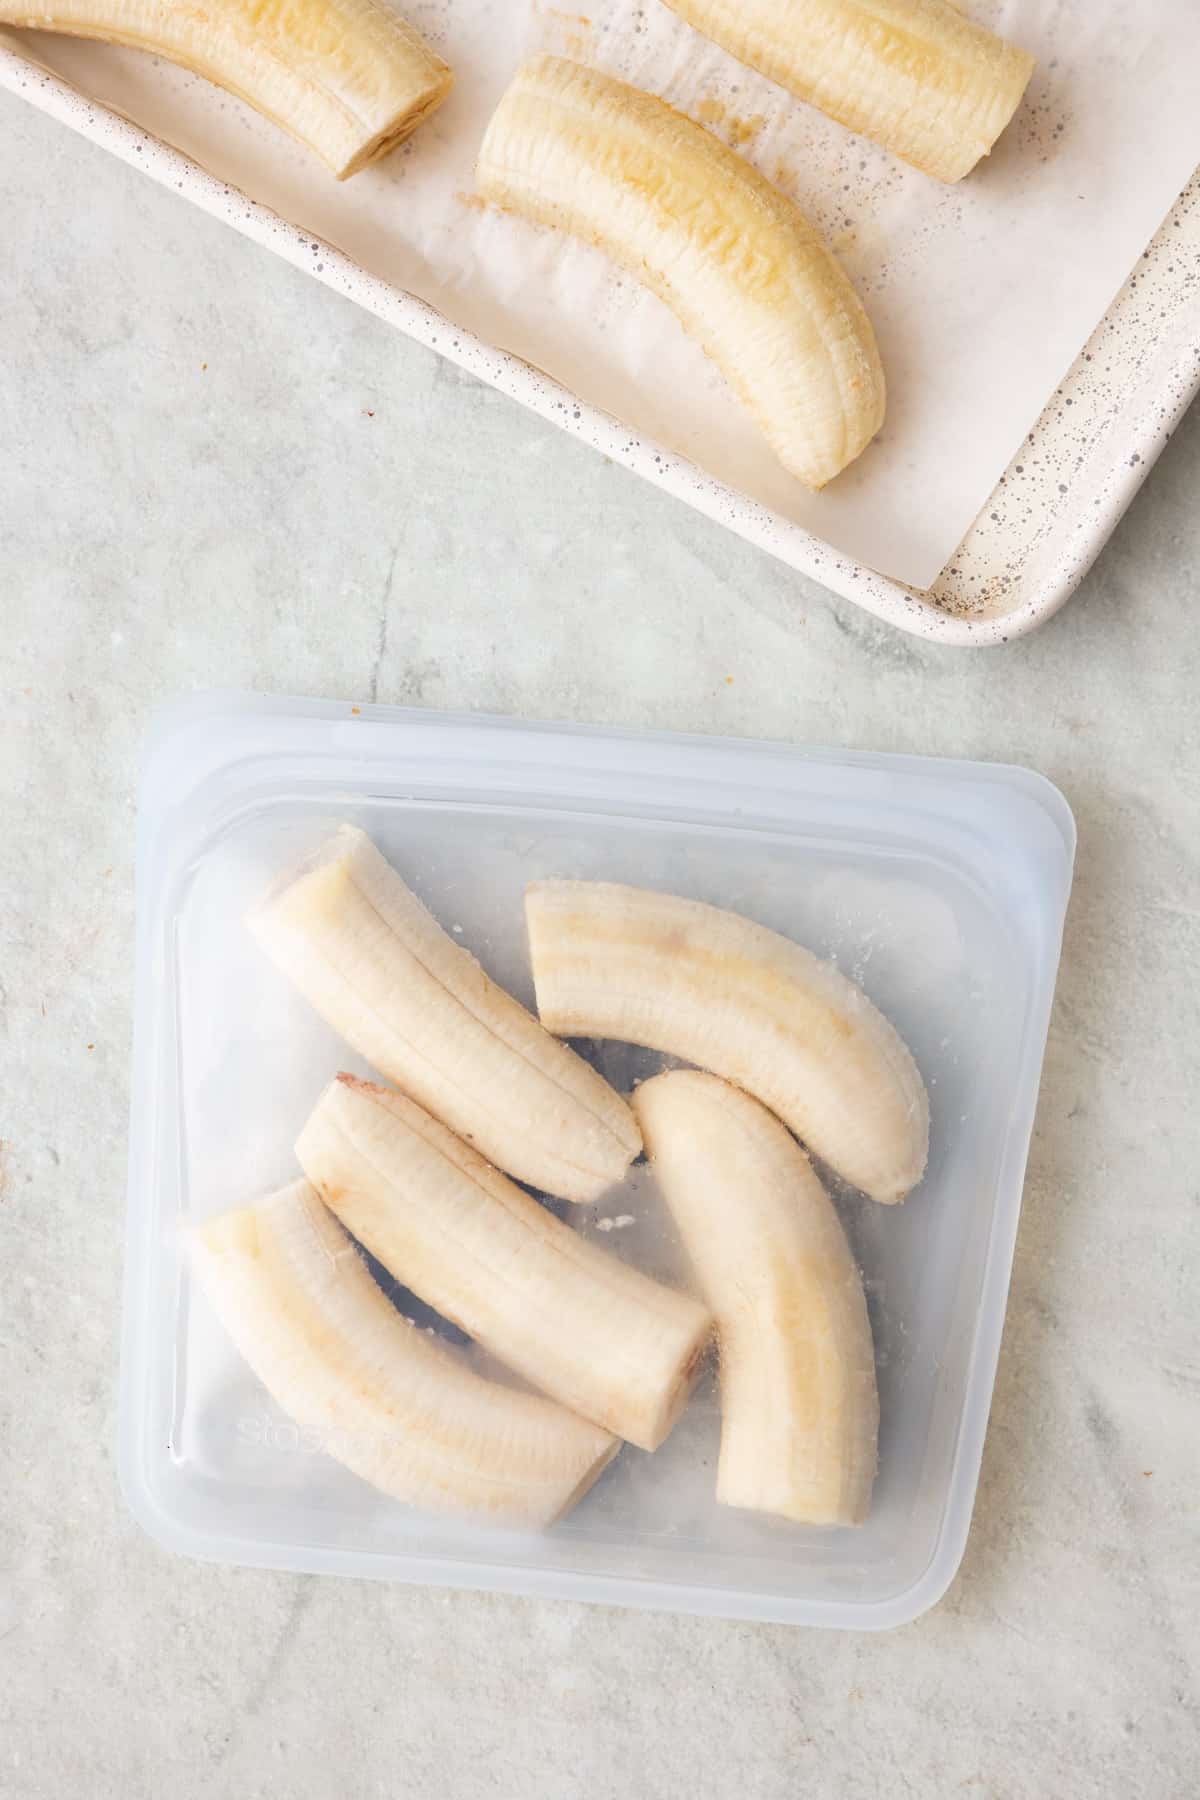 Frozen banana halves inside a reusable freezer bag with tray of them nearby.